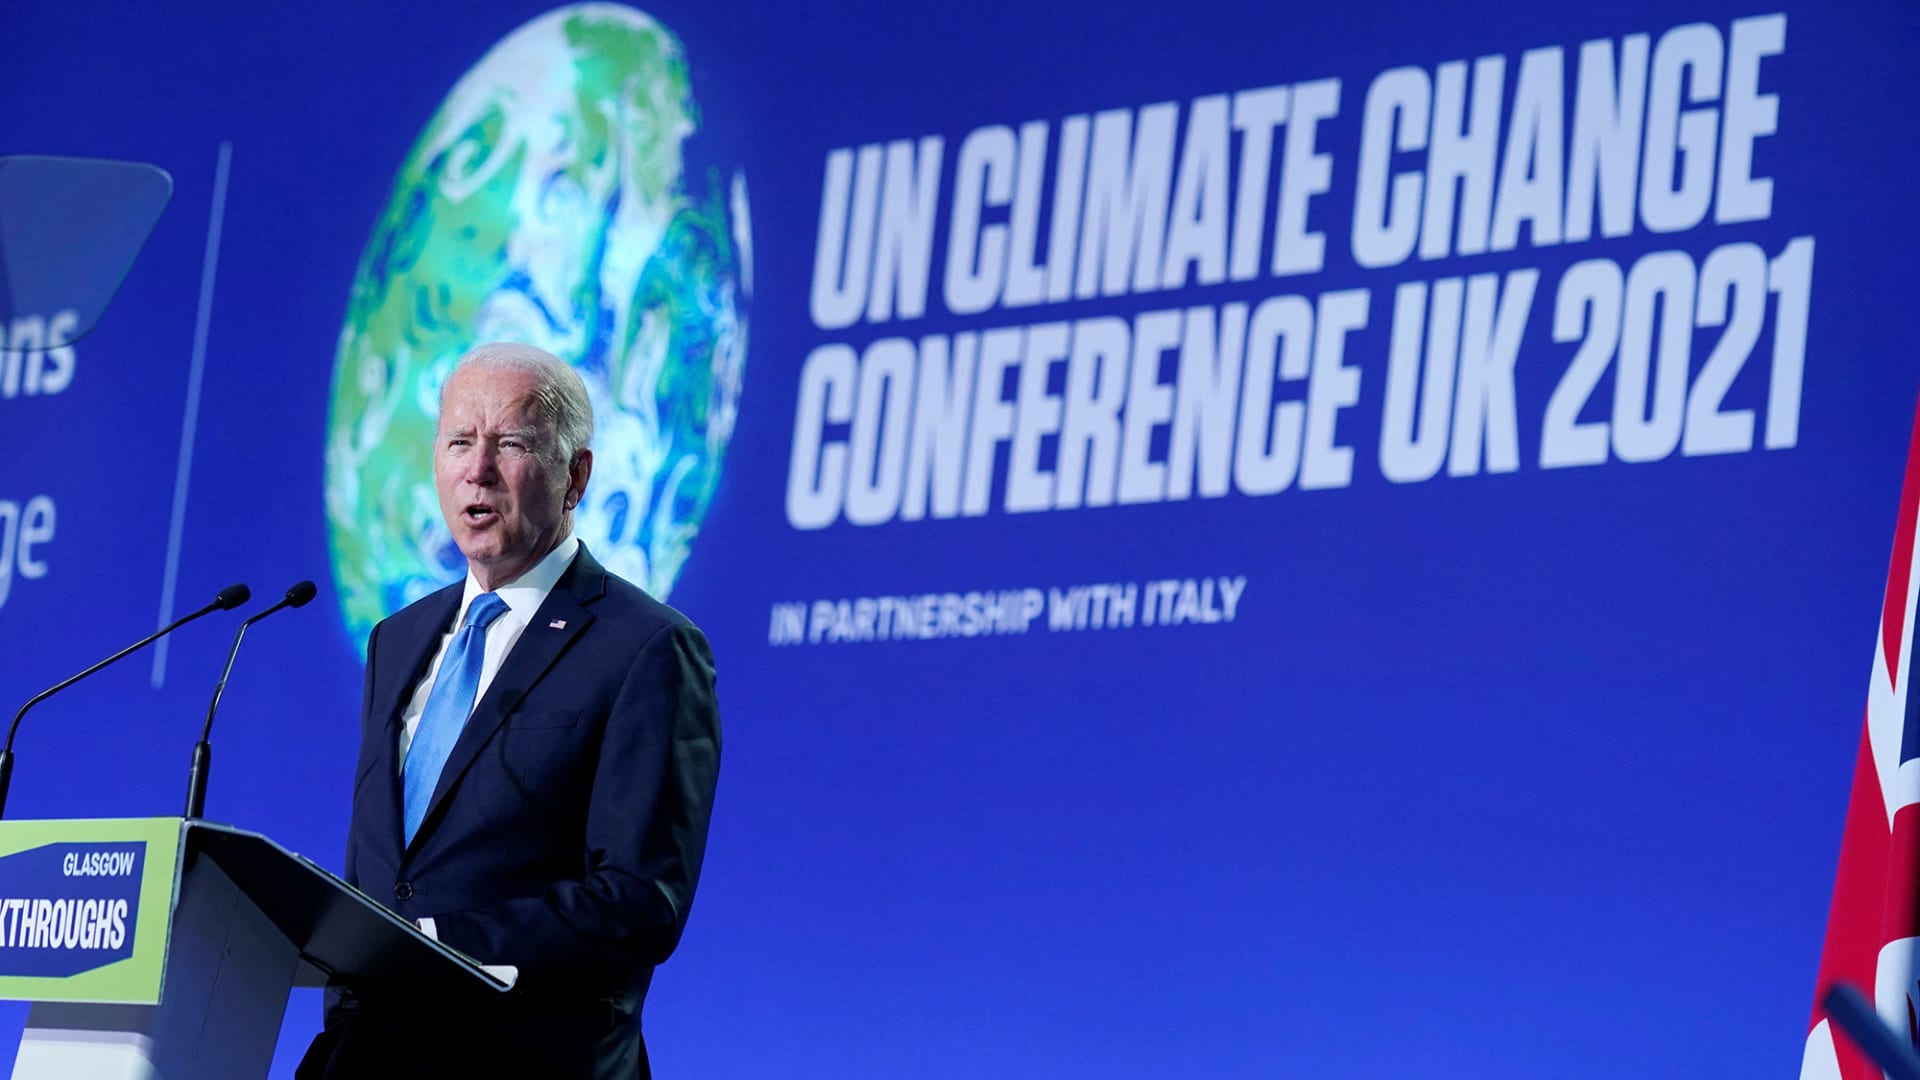 President Joe Biden delivers a speech as part of the COP26 UN Climate Change Conference in Glasgow, Scotland, on November 2, 2021.